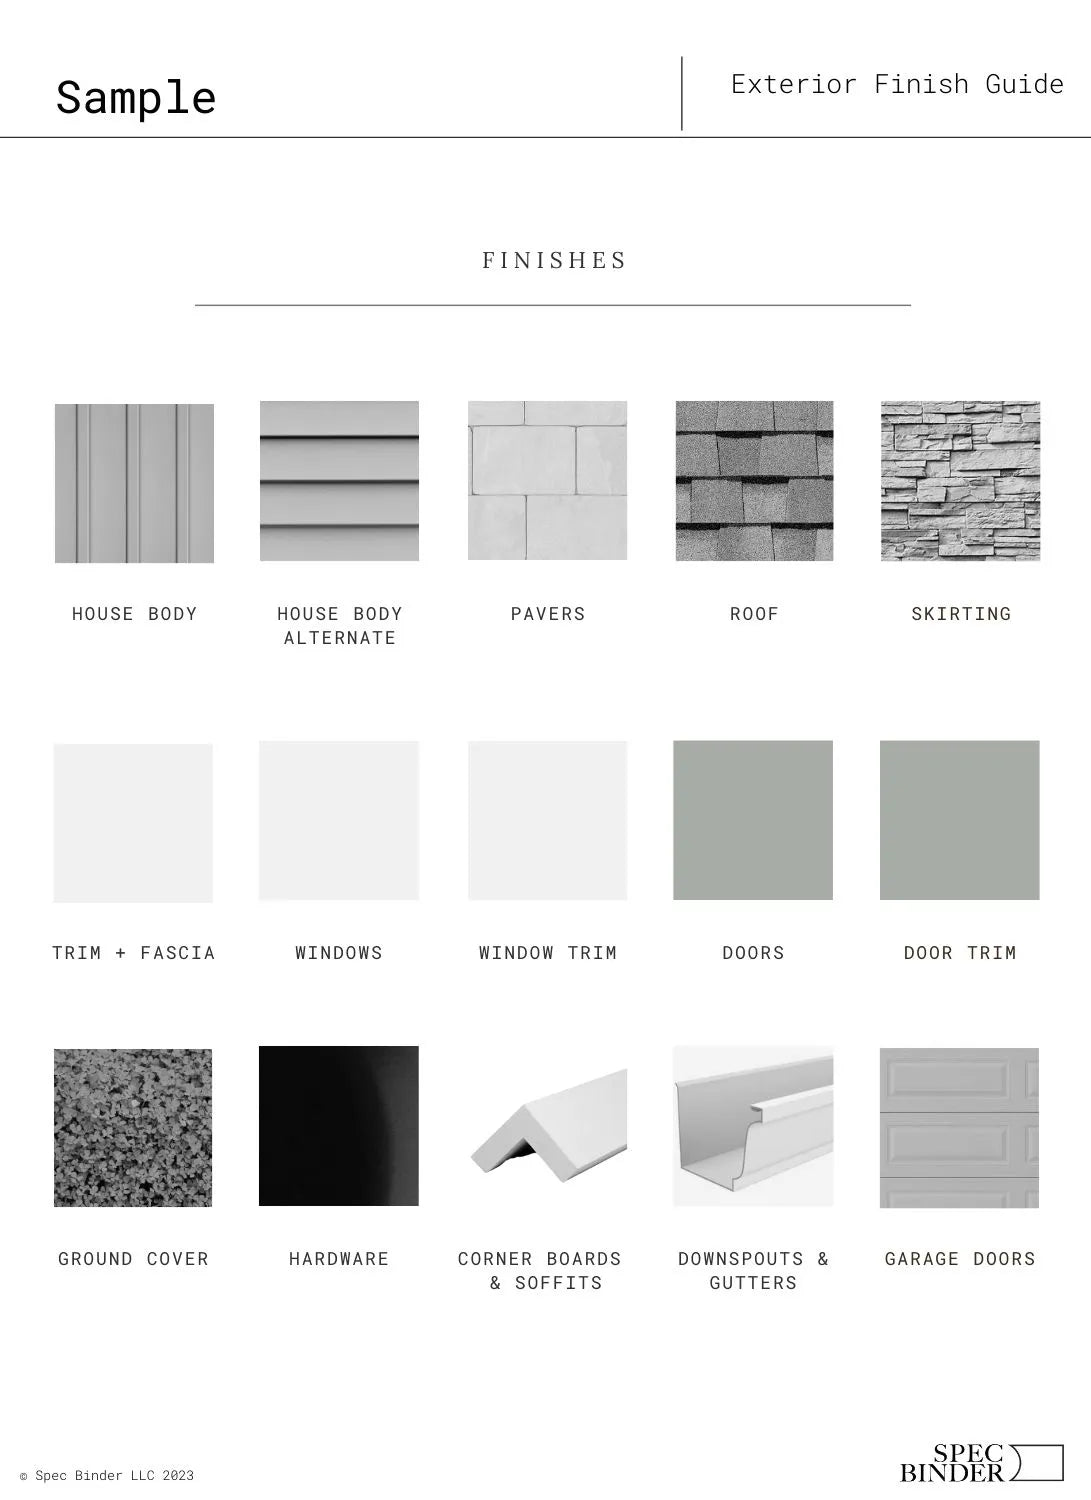 See photos of The Olivia paint colors in different spaces.The Olivia Exterior reference images, paint samples, color swatches, and design elements. The Olivia bathroom design is Light, Simple, Traditional, and Versatile. The Olivia 